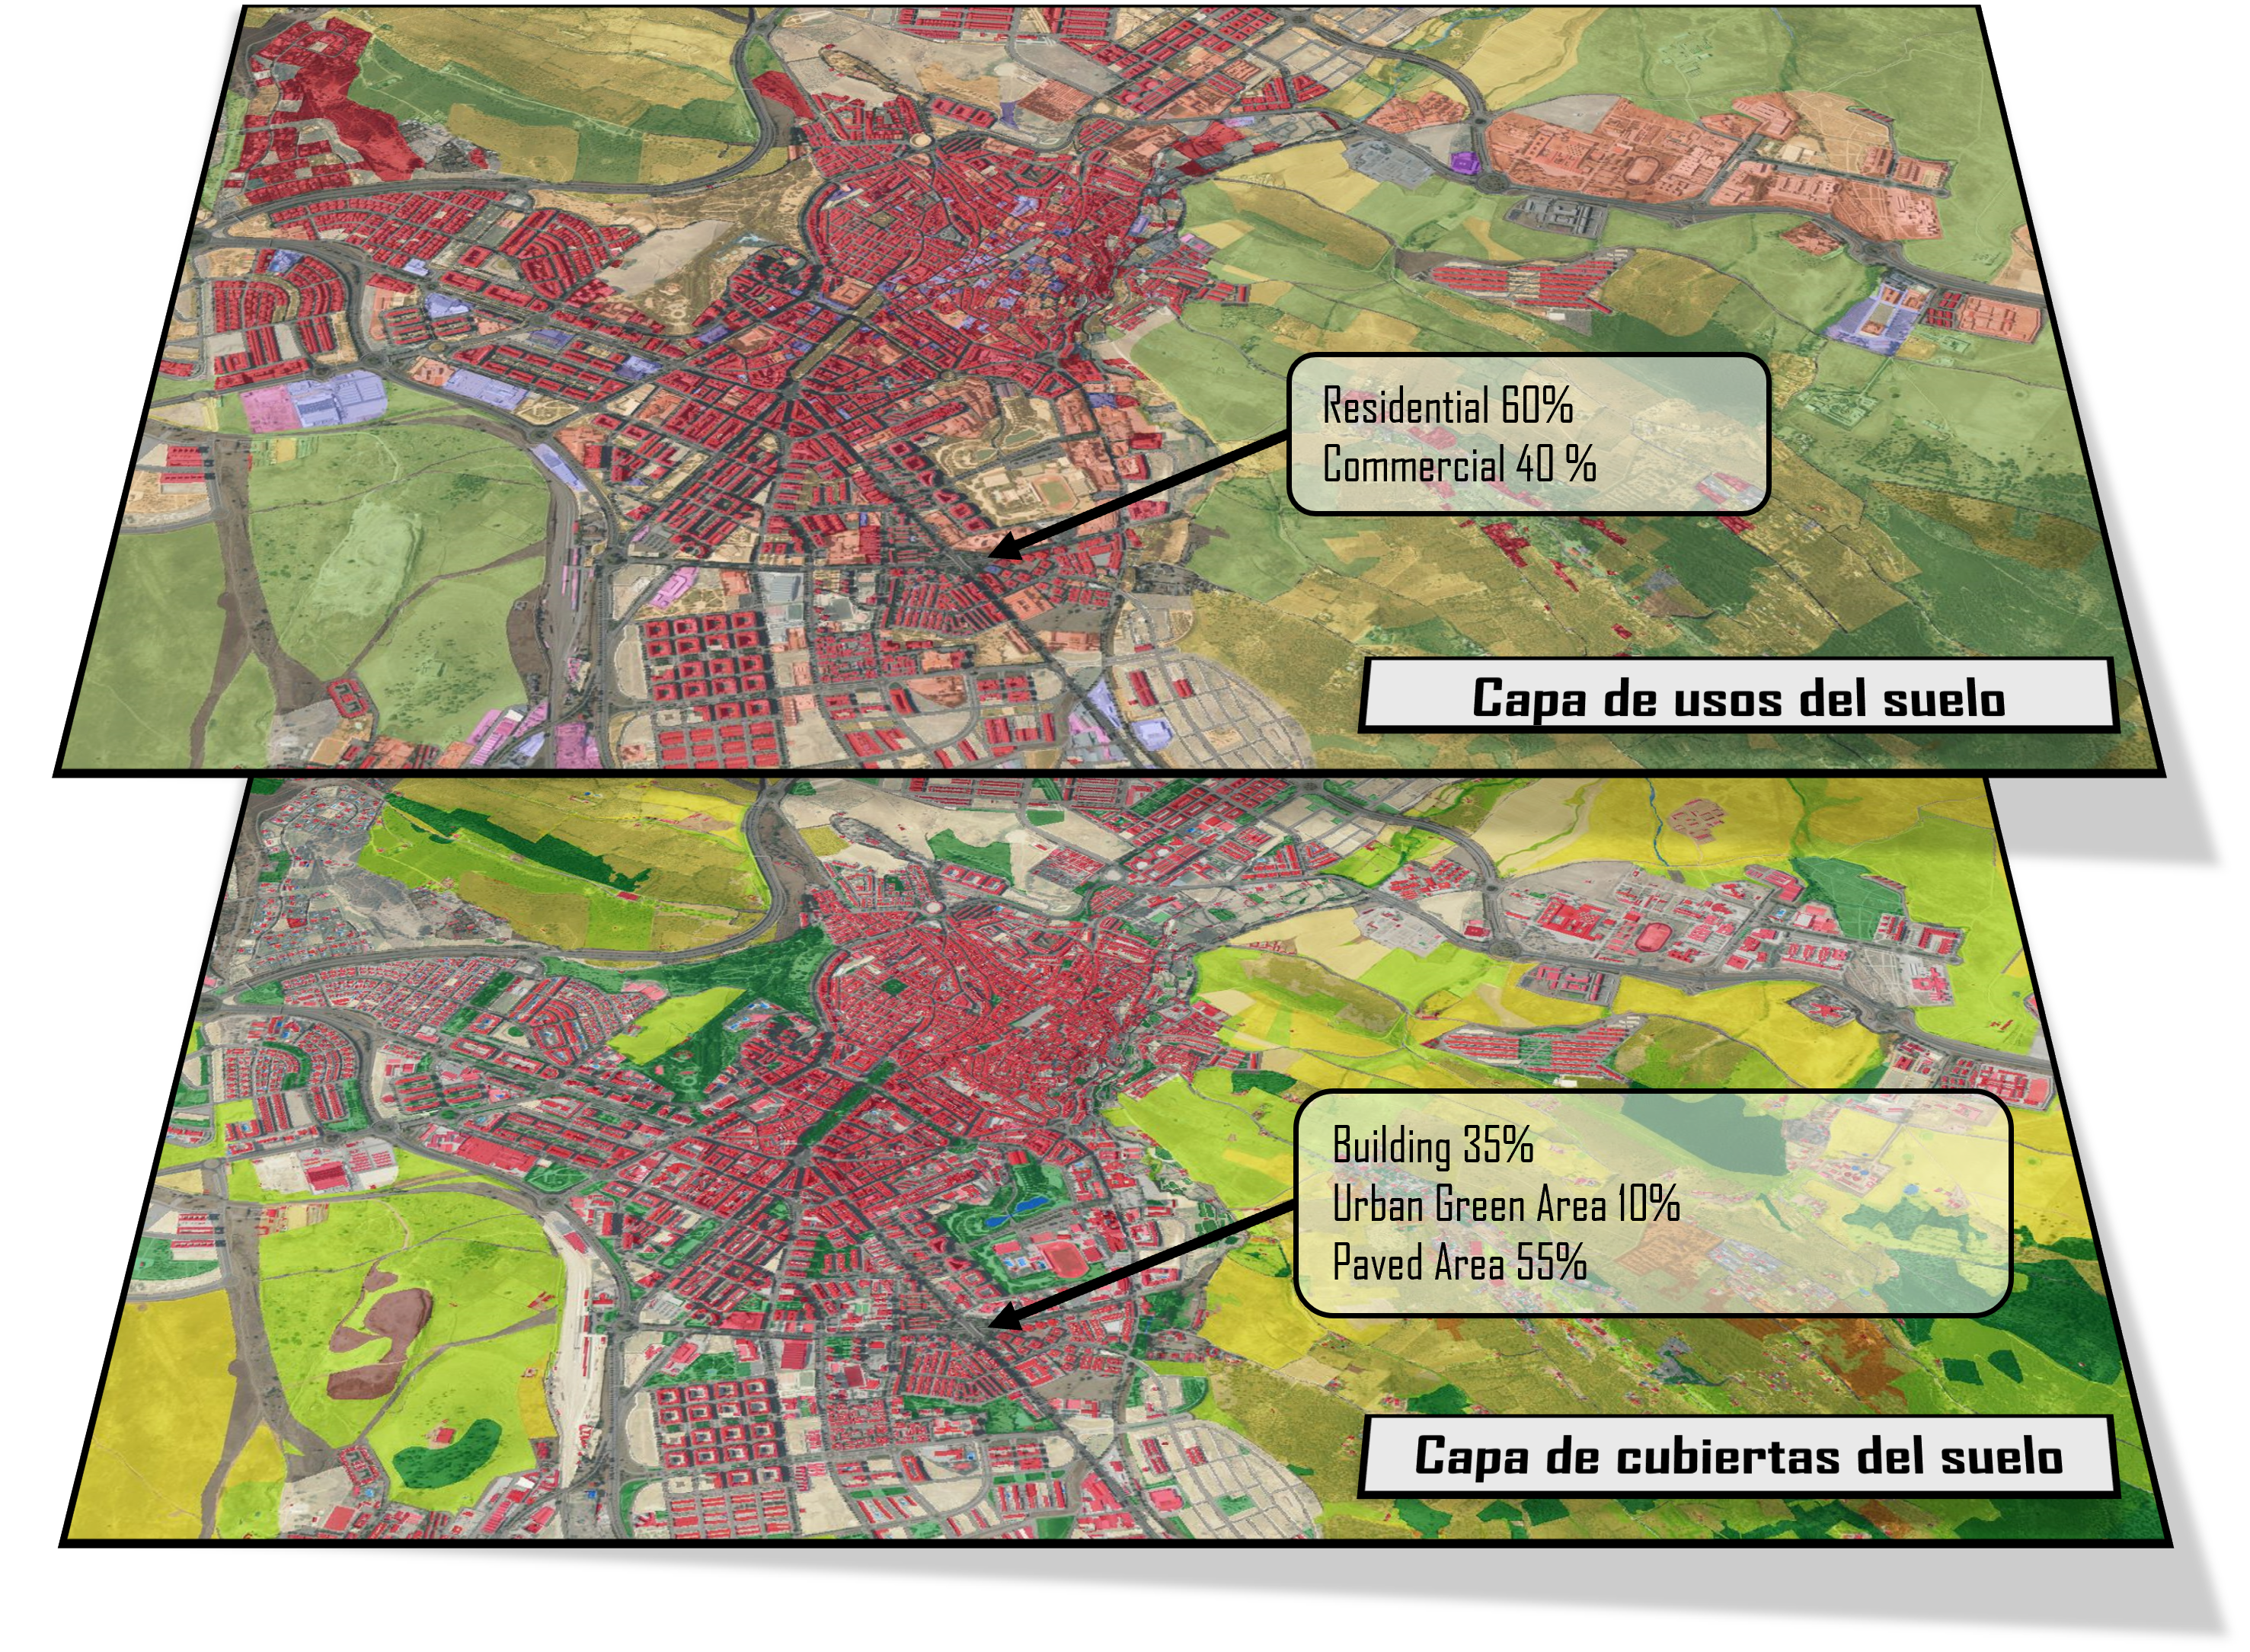 Example image of land use and land cover.